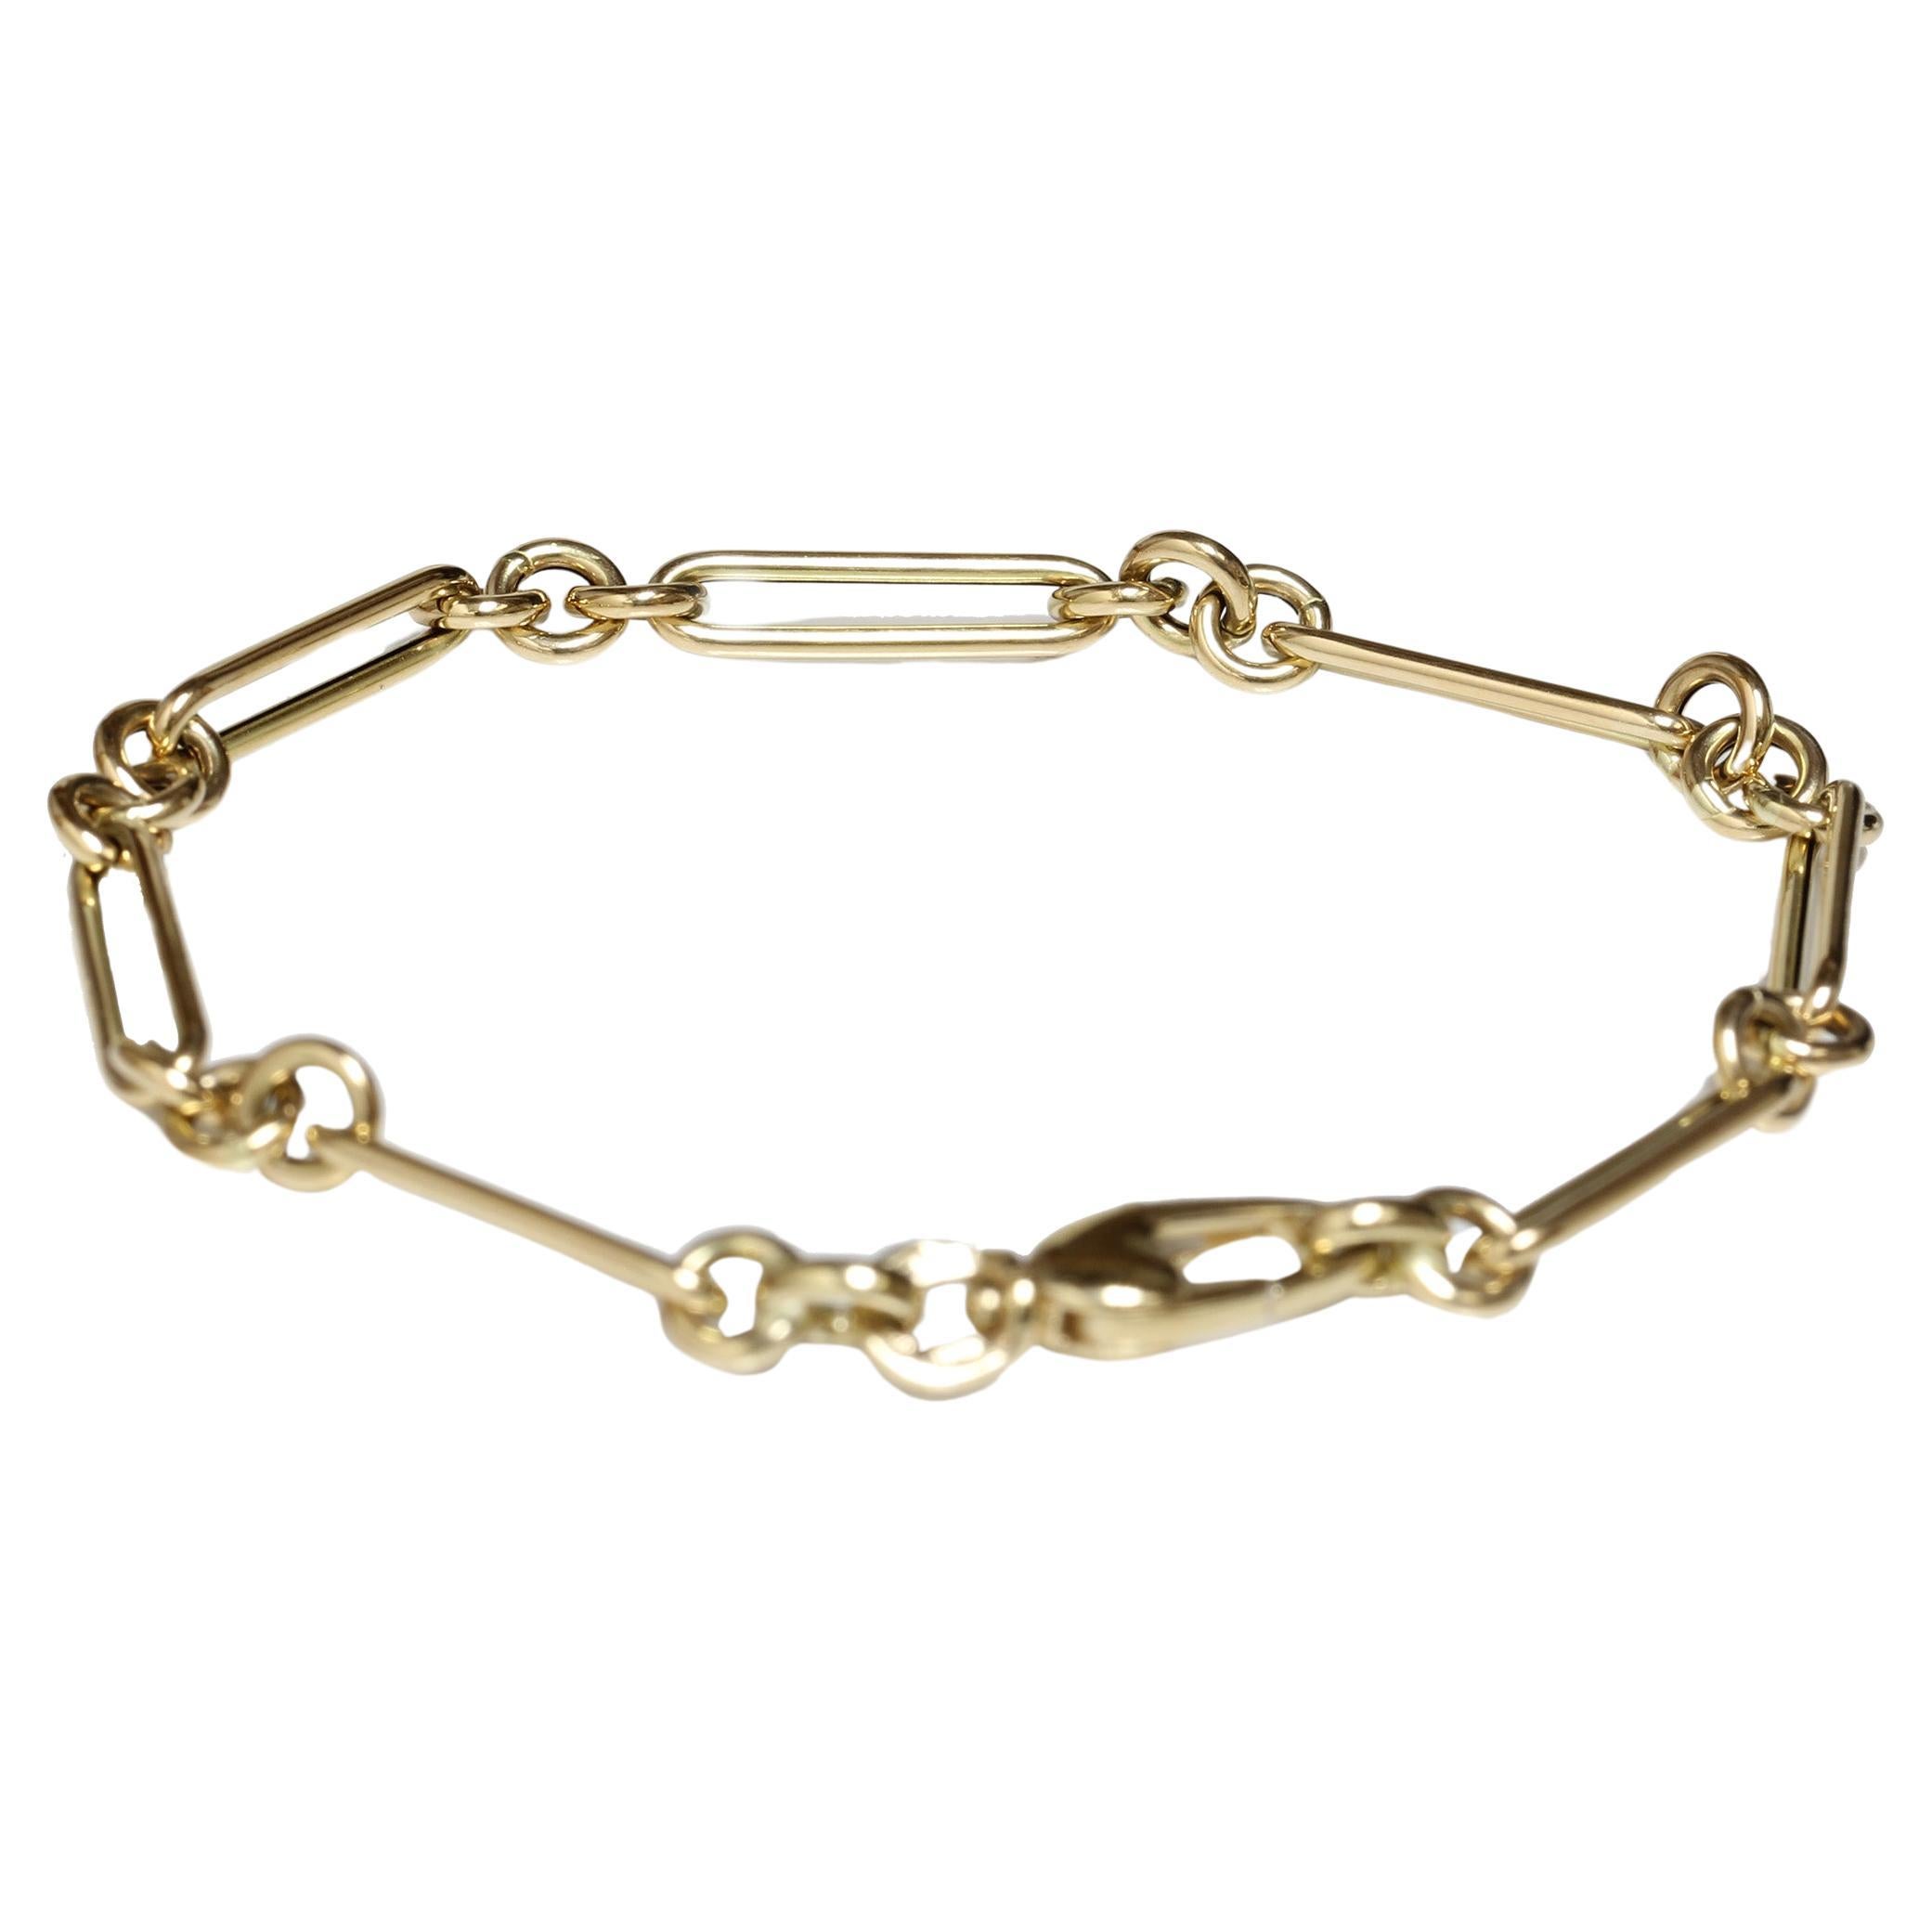 Paper Clip Link and Rolo Chain Bracelet in 14K Yellow Gold - 7" Perfect as Women